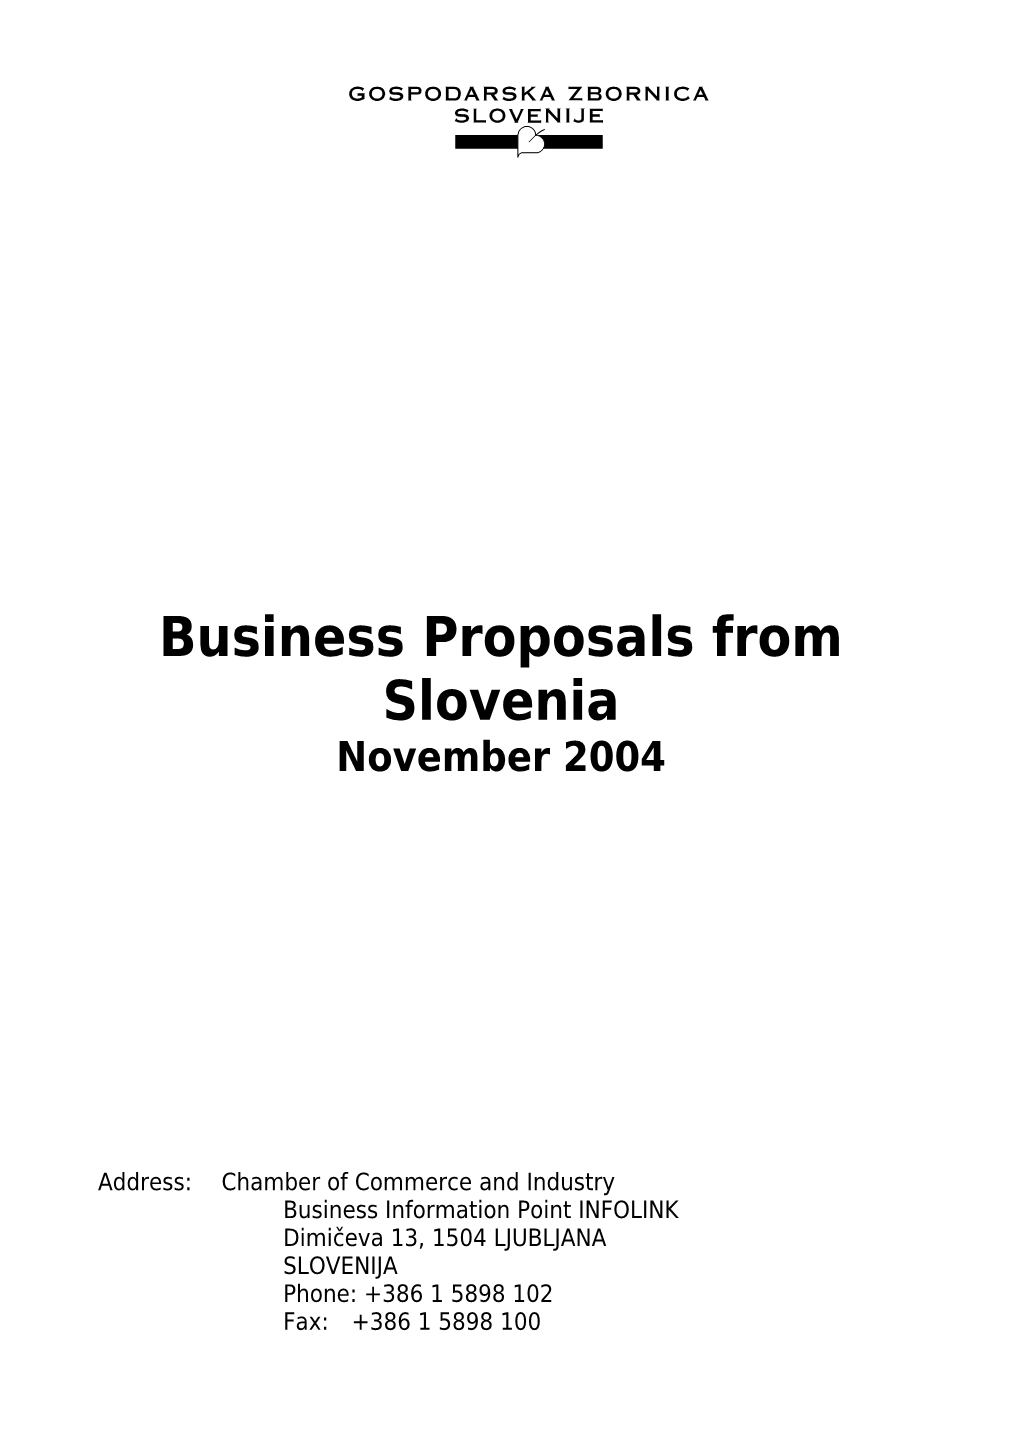 Business Proposals from Slovenia s1